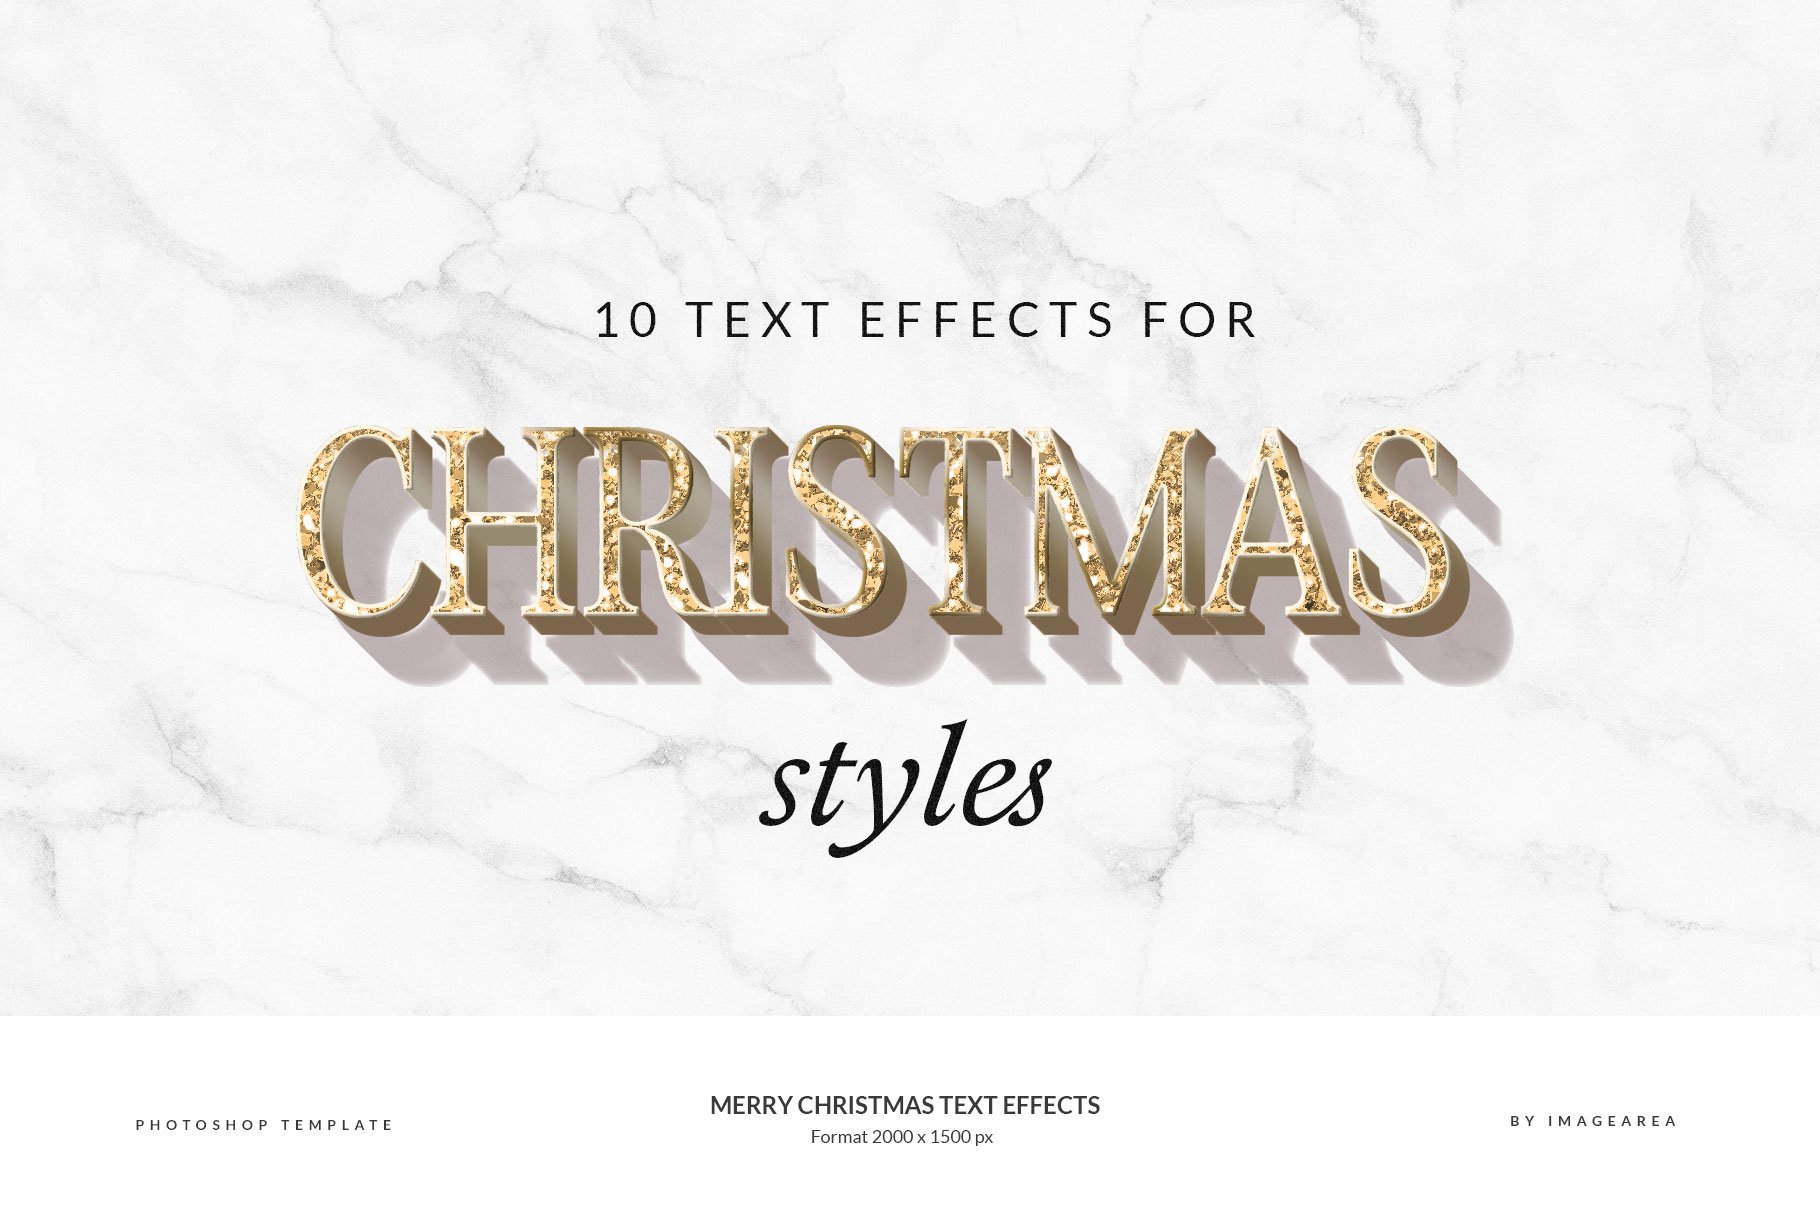 Christmas Text Effectspreview image.